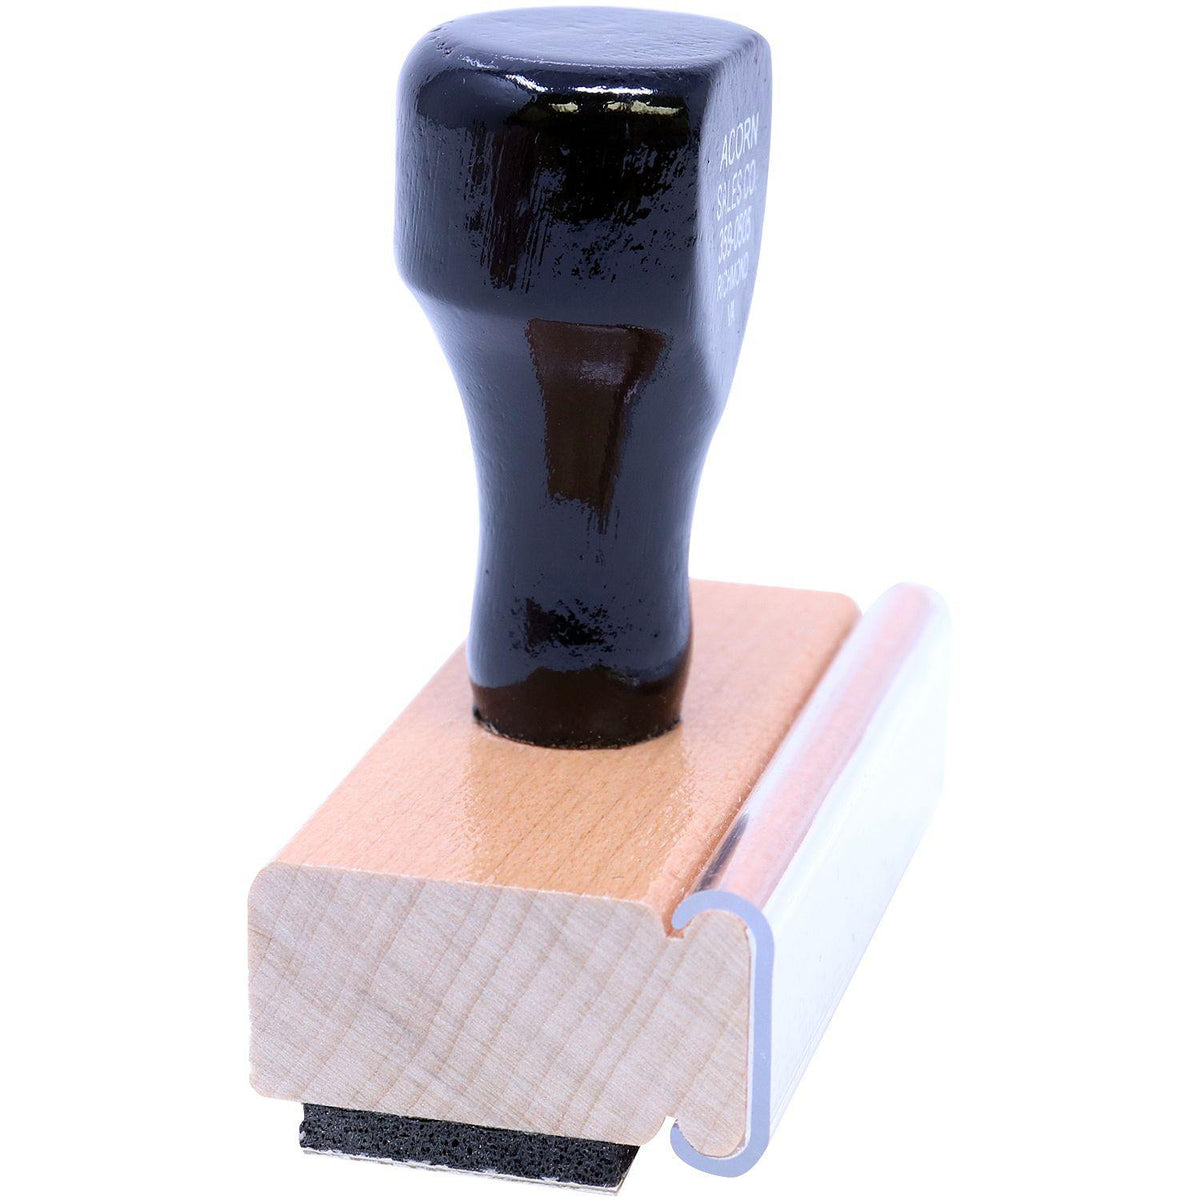 Outline Completed Rubber Stamp - Engineer Seal Stamps - Brand_Acorn, Impression Size_Small, Stamp Type_Regular Stamp, Type of Use_Business, Type of Use_Office